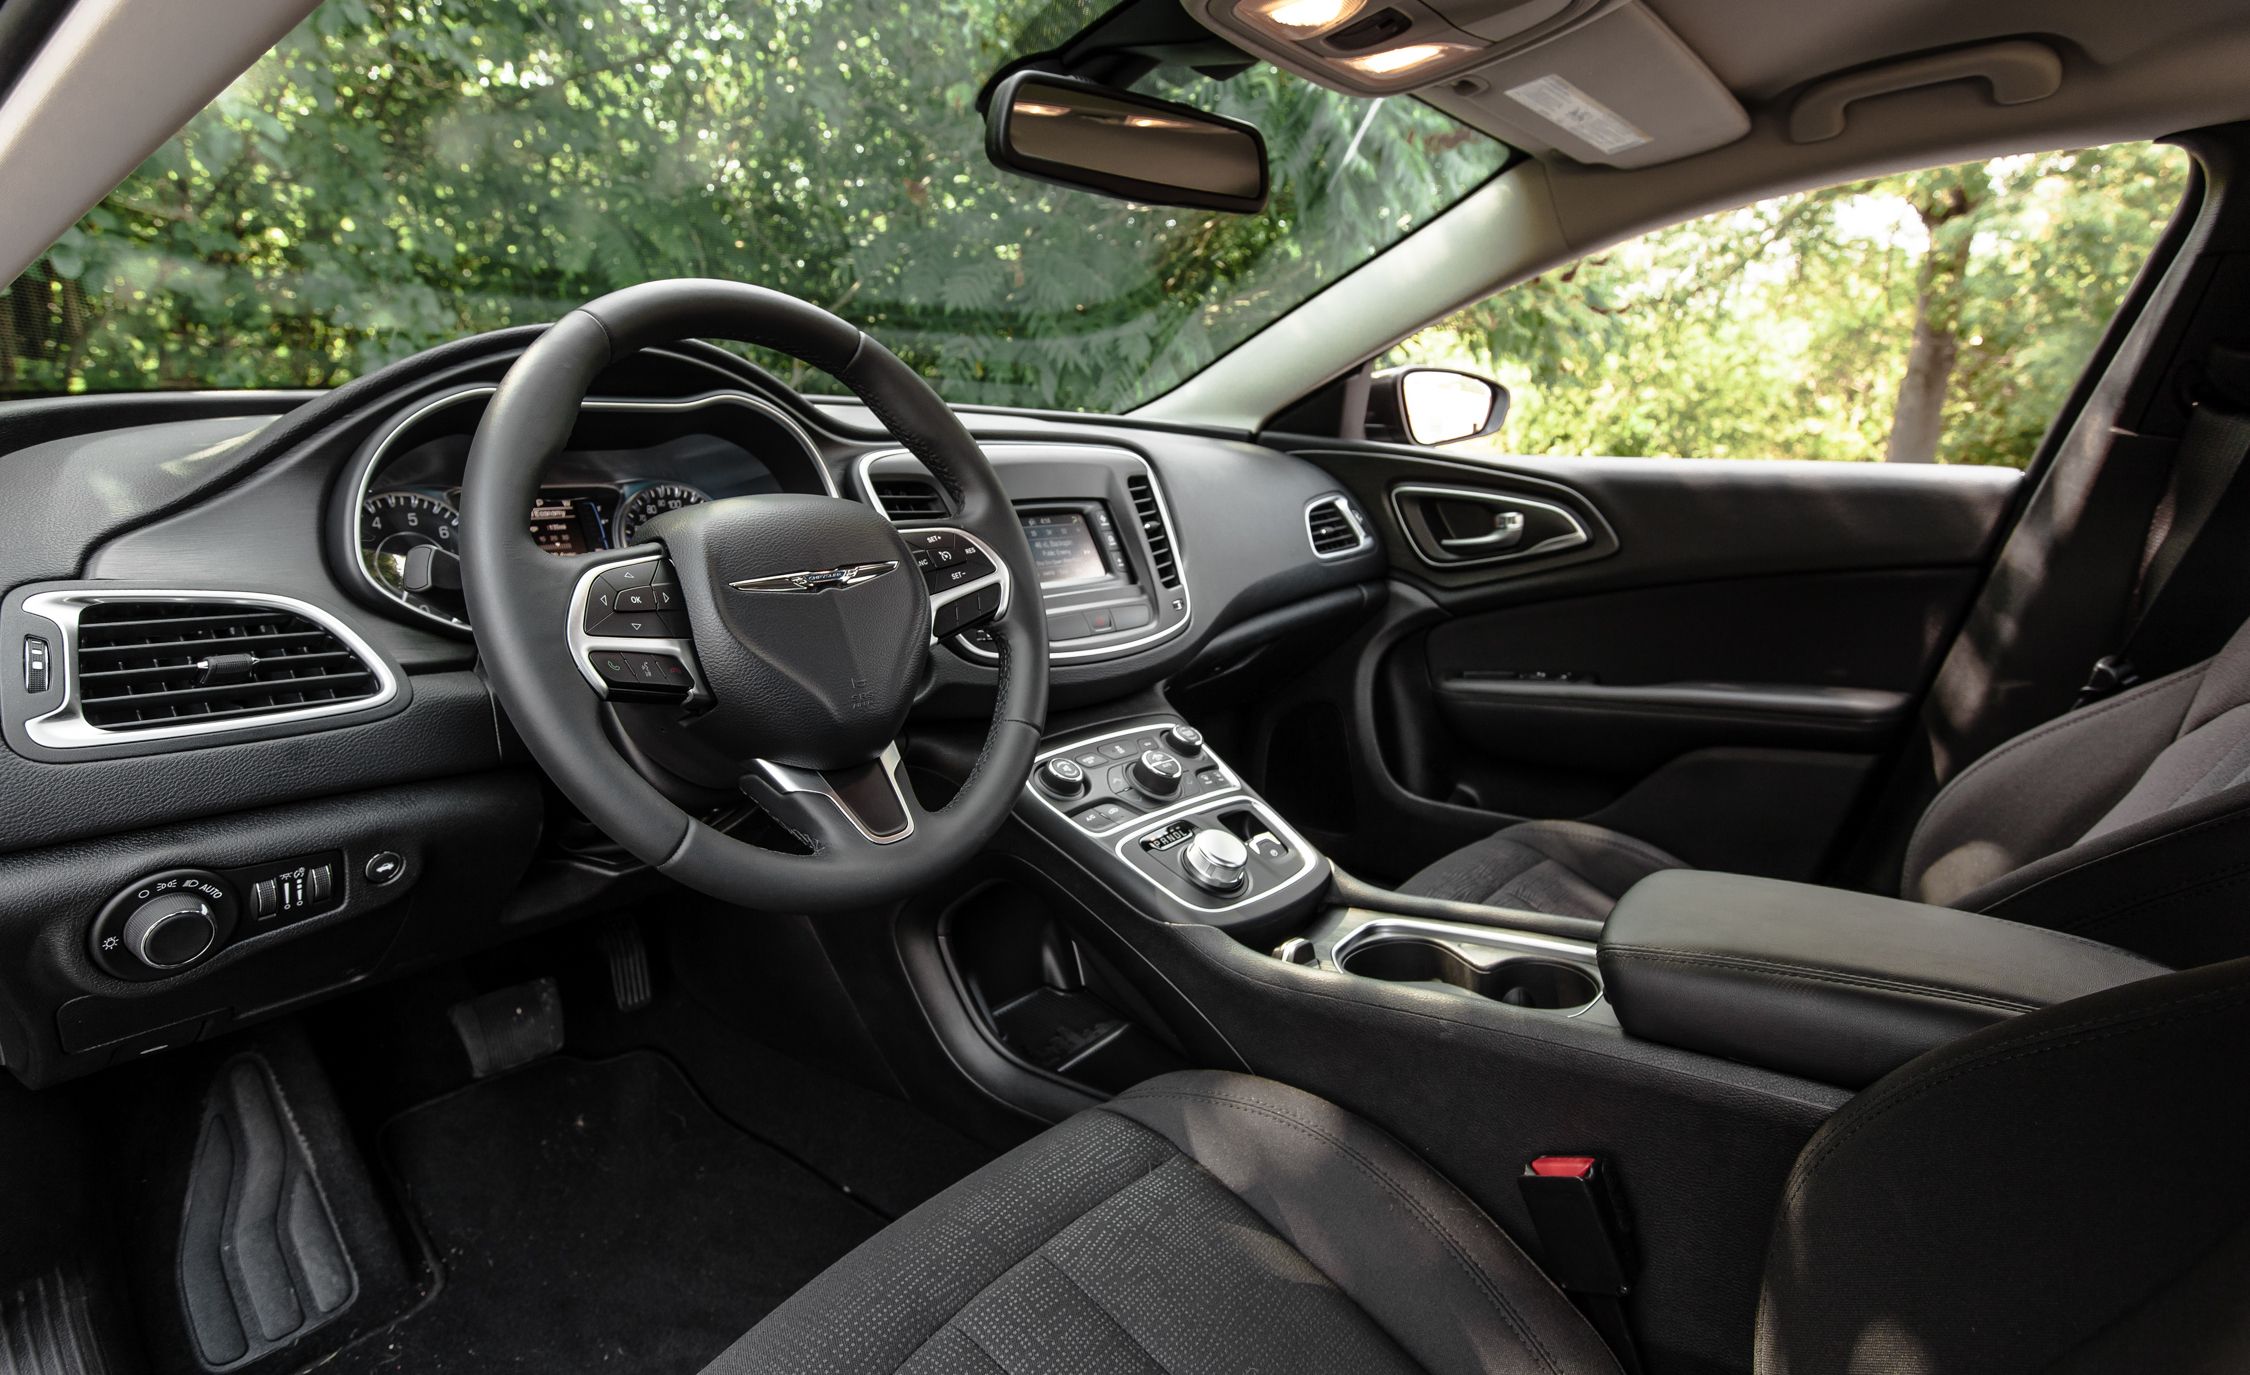 2015 Chrysler 200 Limited Interior (View 5 of 19)